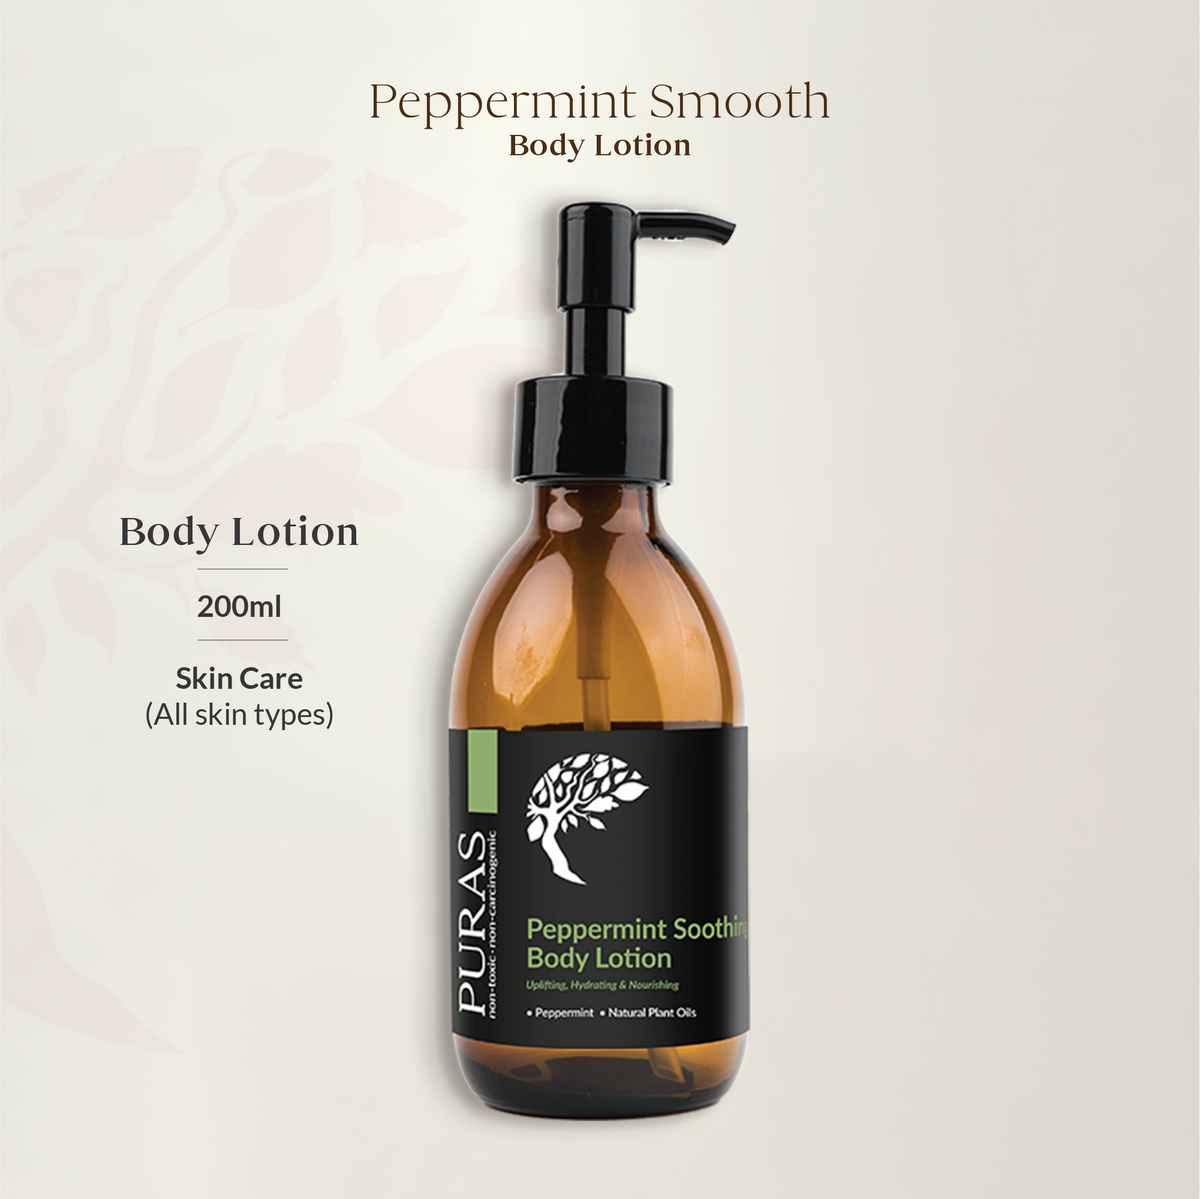 Peppermint Soothing Body Lotion 200ml